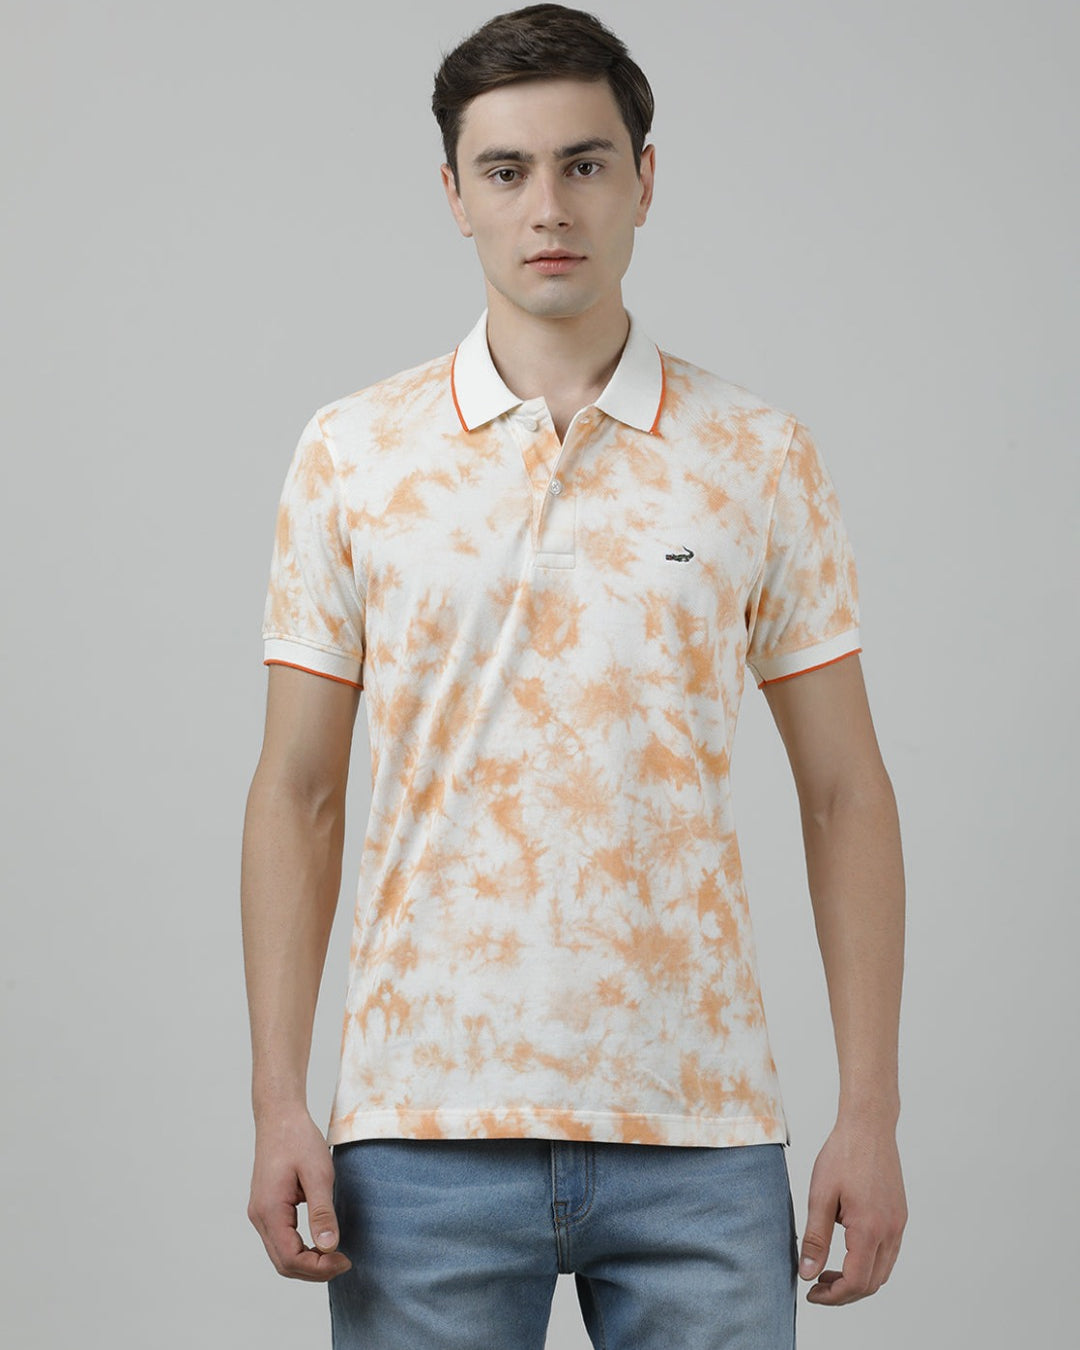 Casual Orange T-Shirt Tie and Dye Half Sleeve Slim Fit with Collar for Men